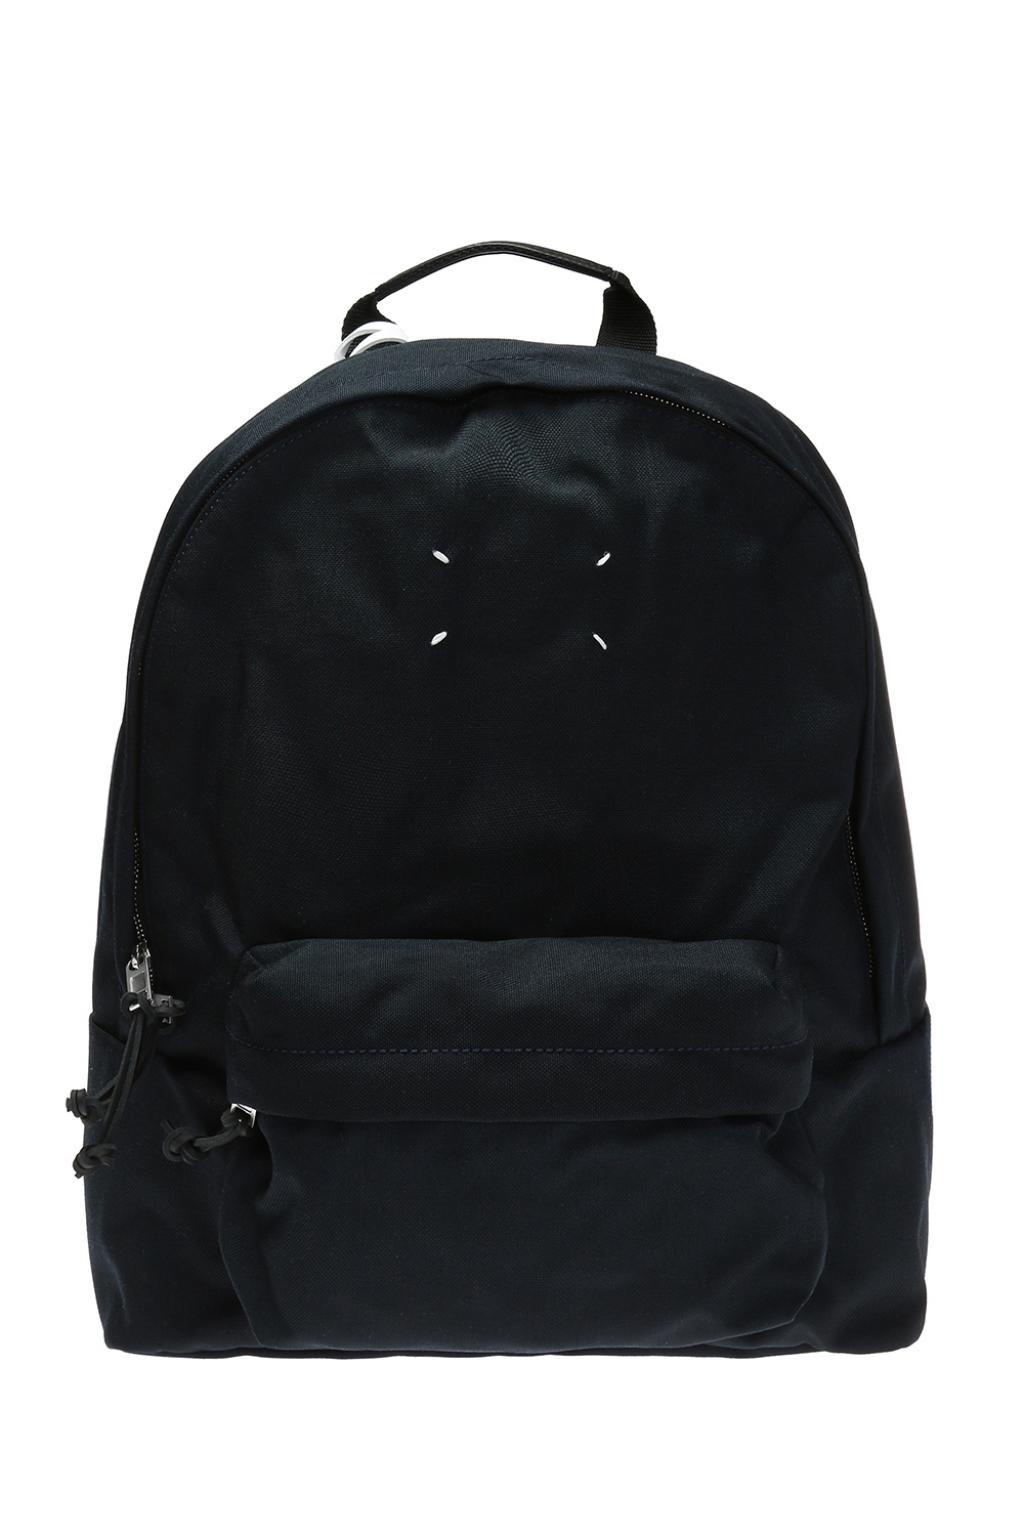 Maison Margiela Leather 'stereotype' Backpack in Navy Blue (Blue) for ...